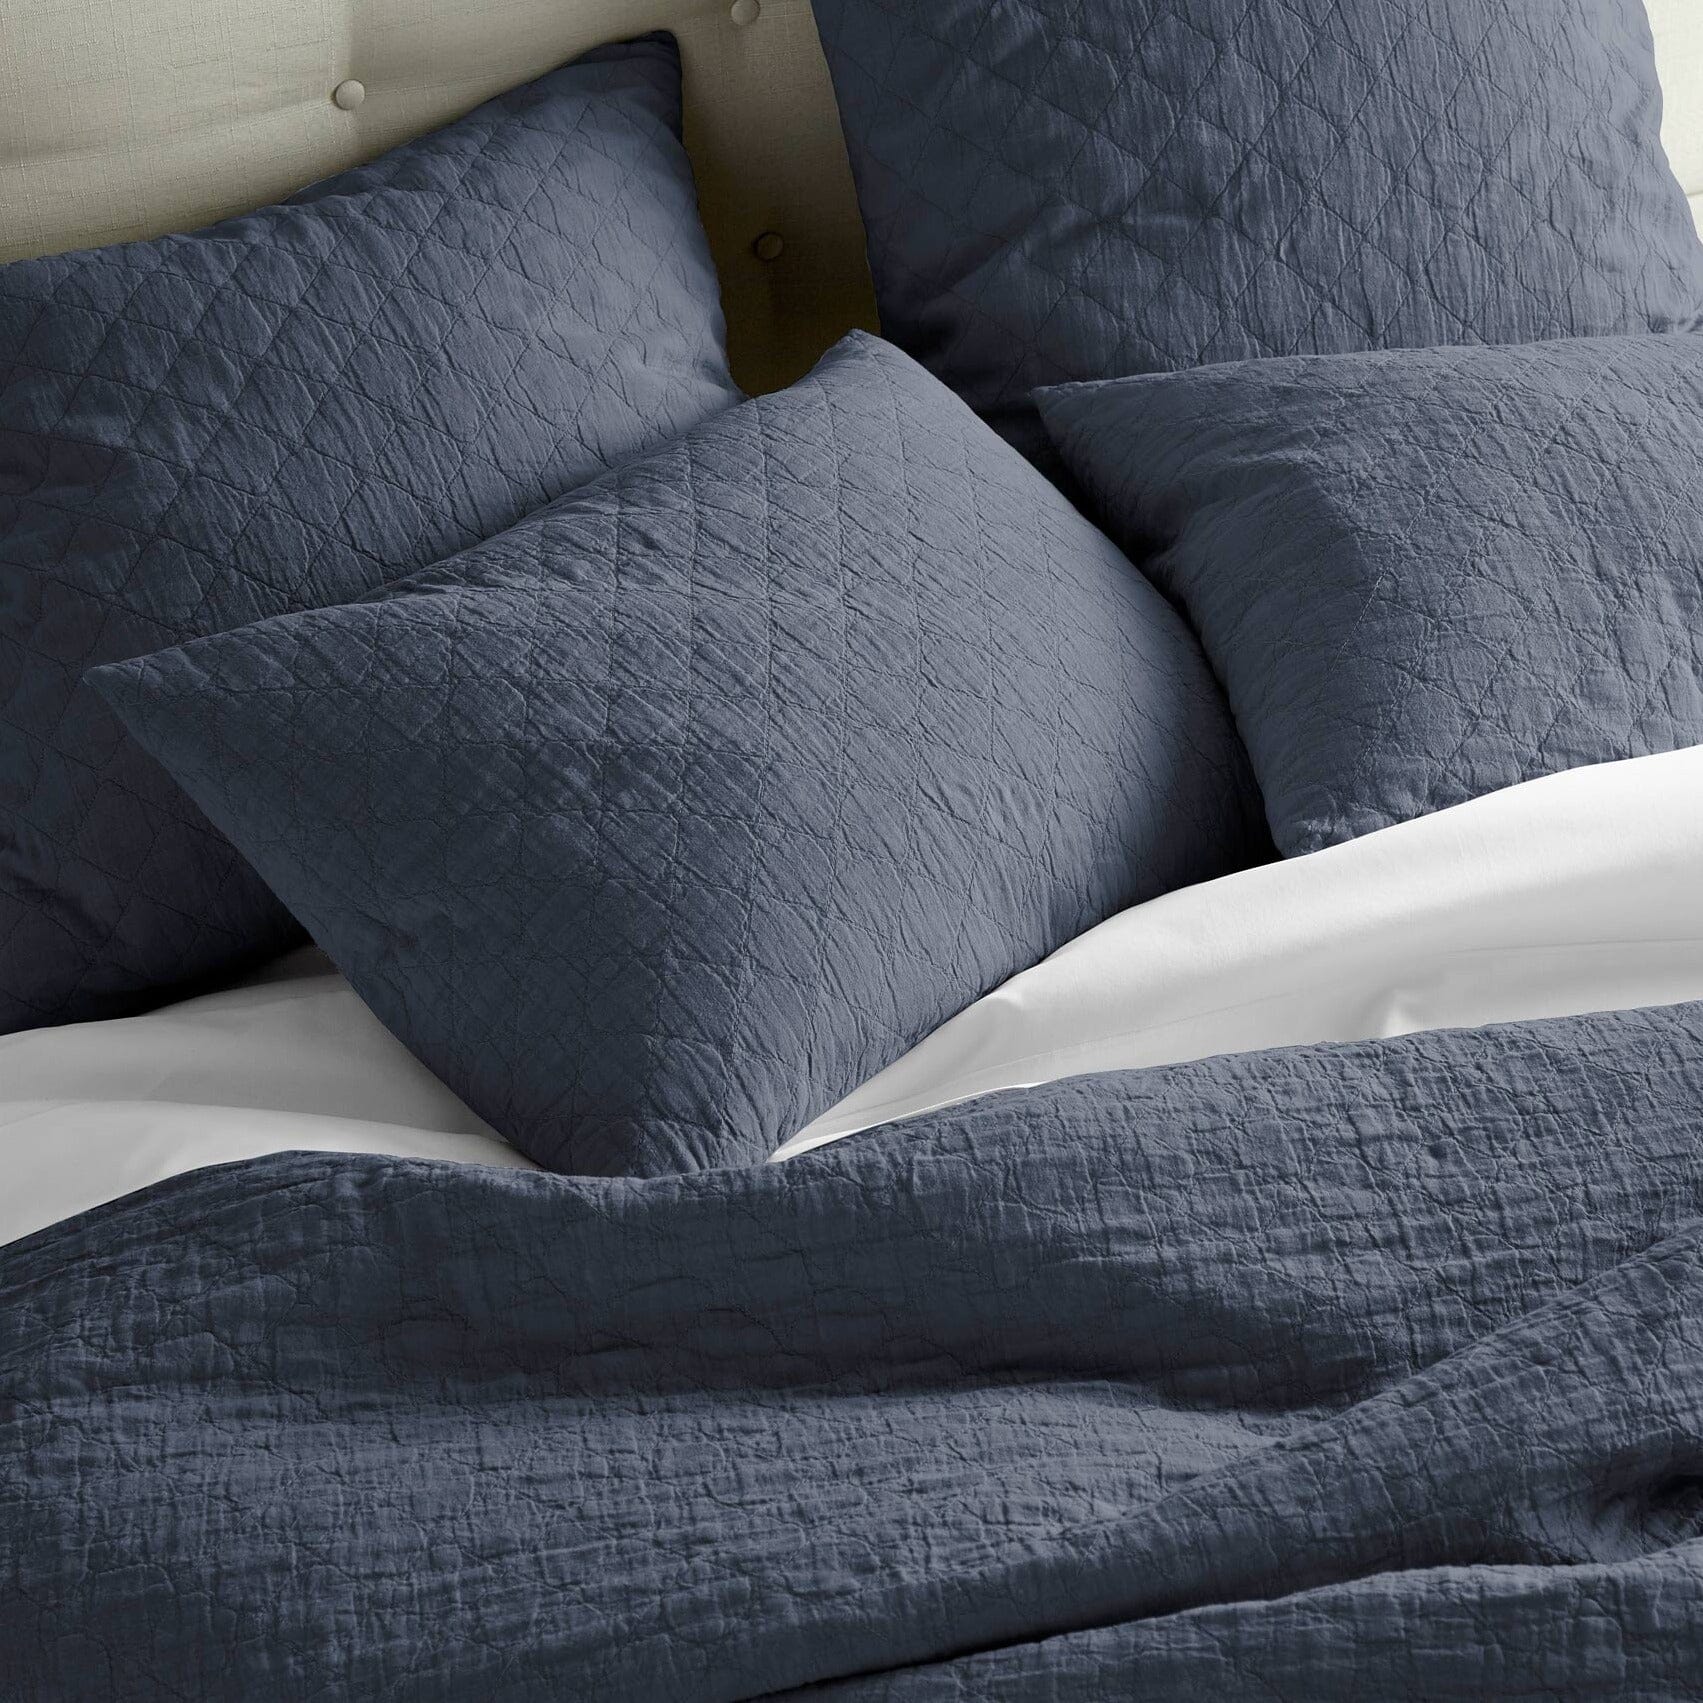 Peacock Alley Coverlet Heritage Marine  - Stone Washed Linen Quilt and Shams with White Sheets